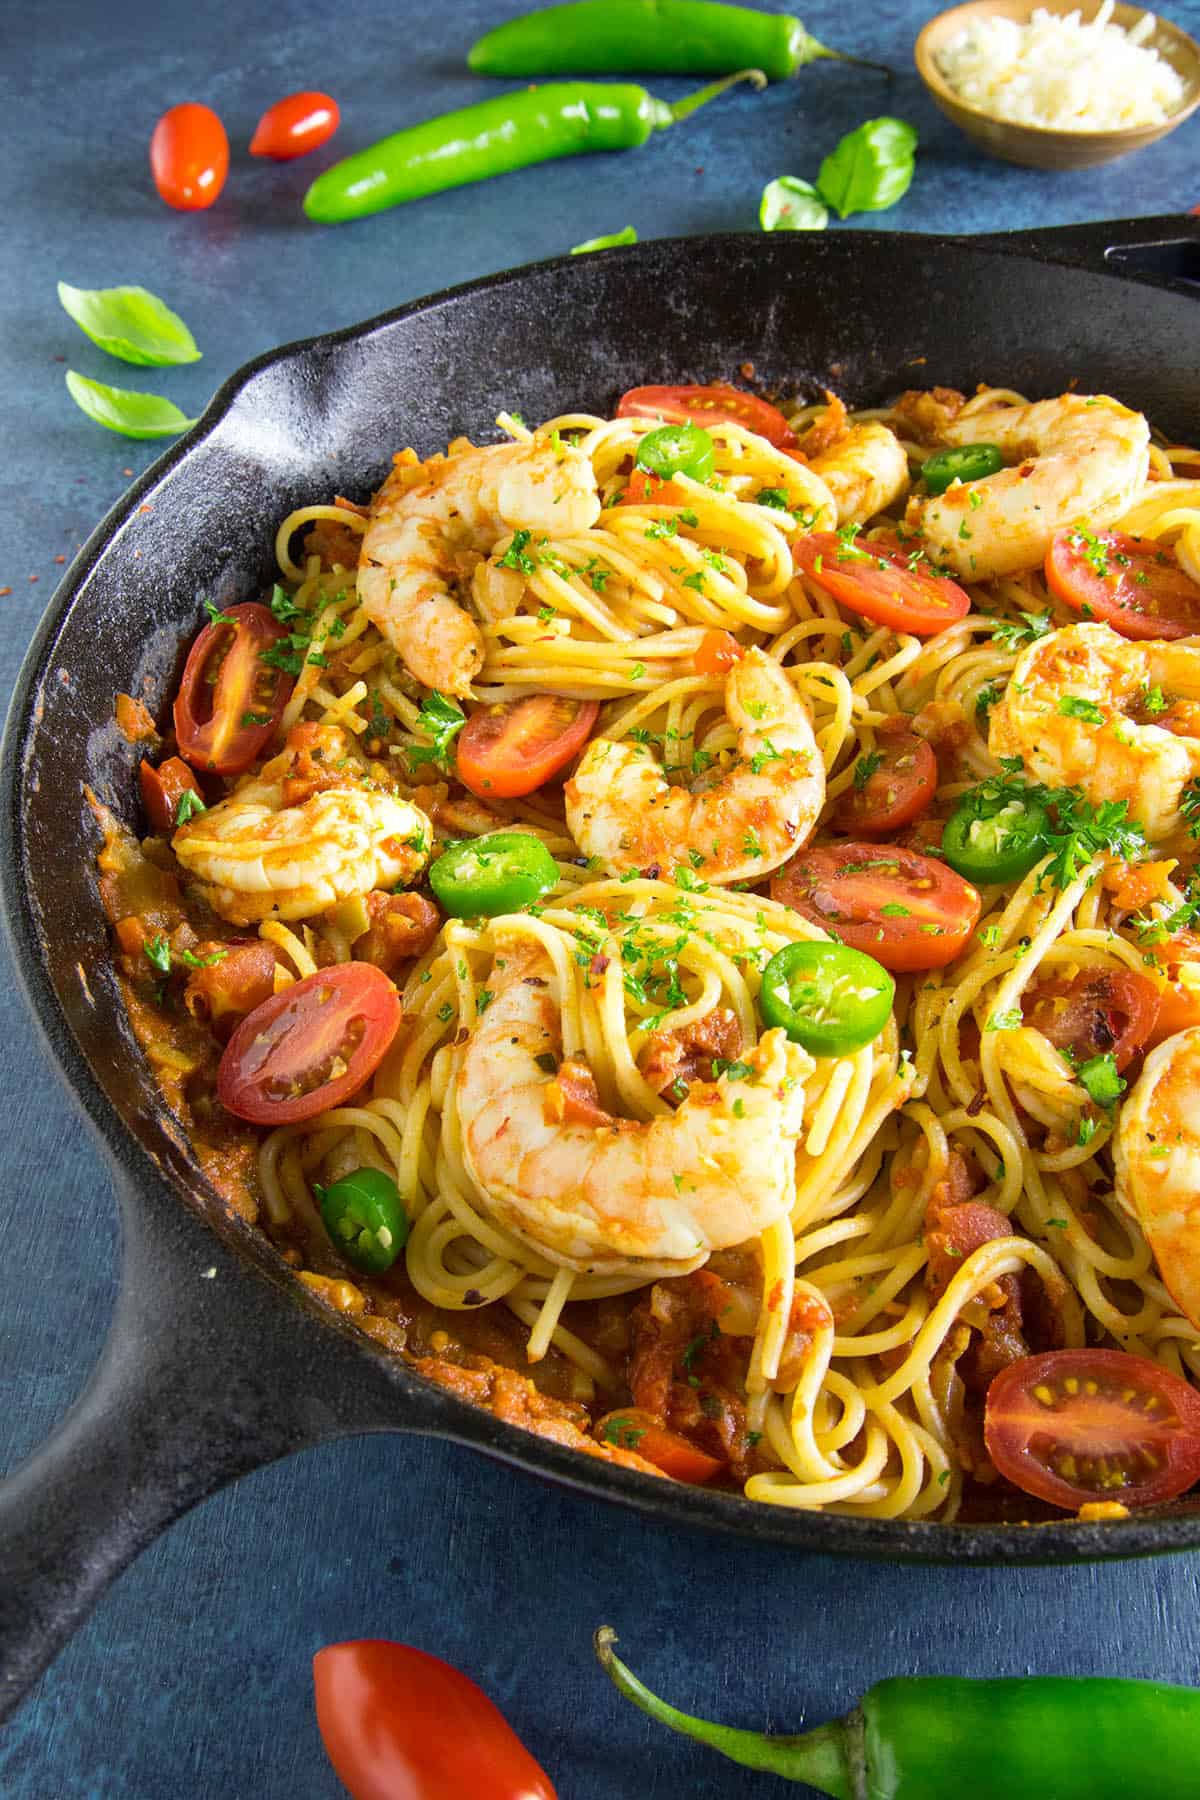 This Cajun shrimp pasta is loaded with a blend of Cajun seasonings and succ...